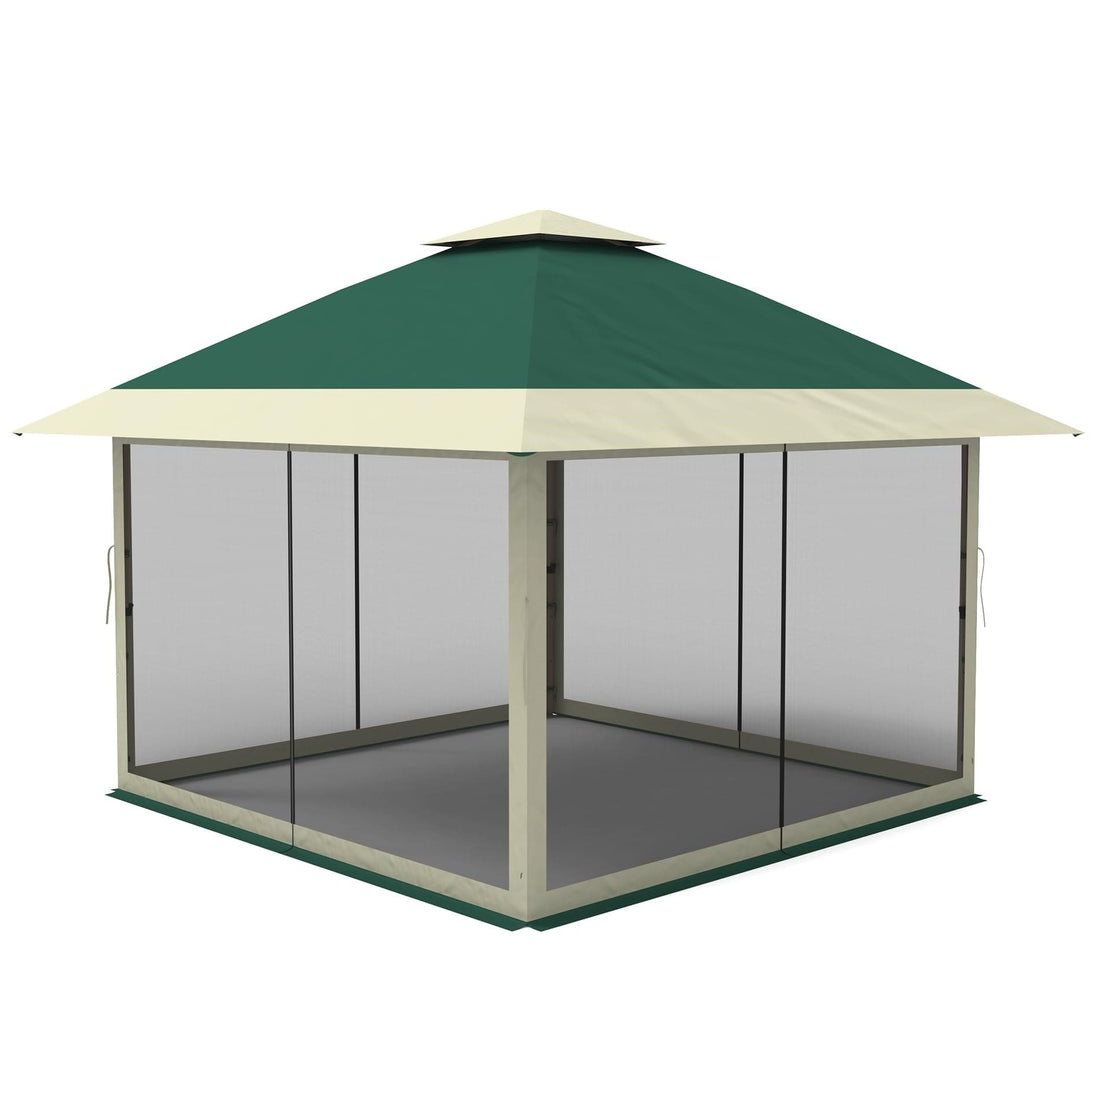 12x12FT Pop Up Gazebo Canopy with Netting for Garden, Deck